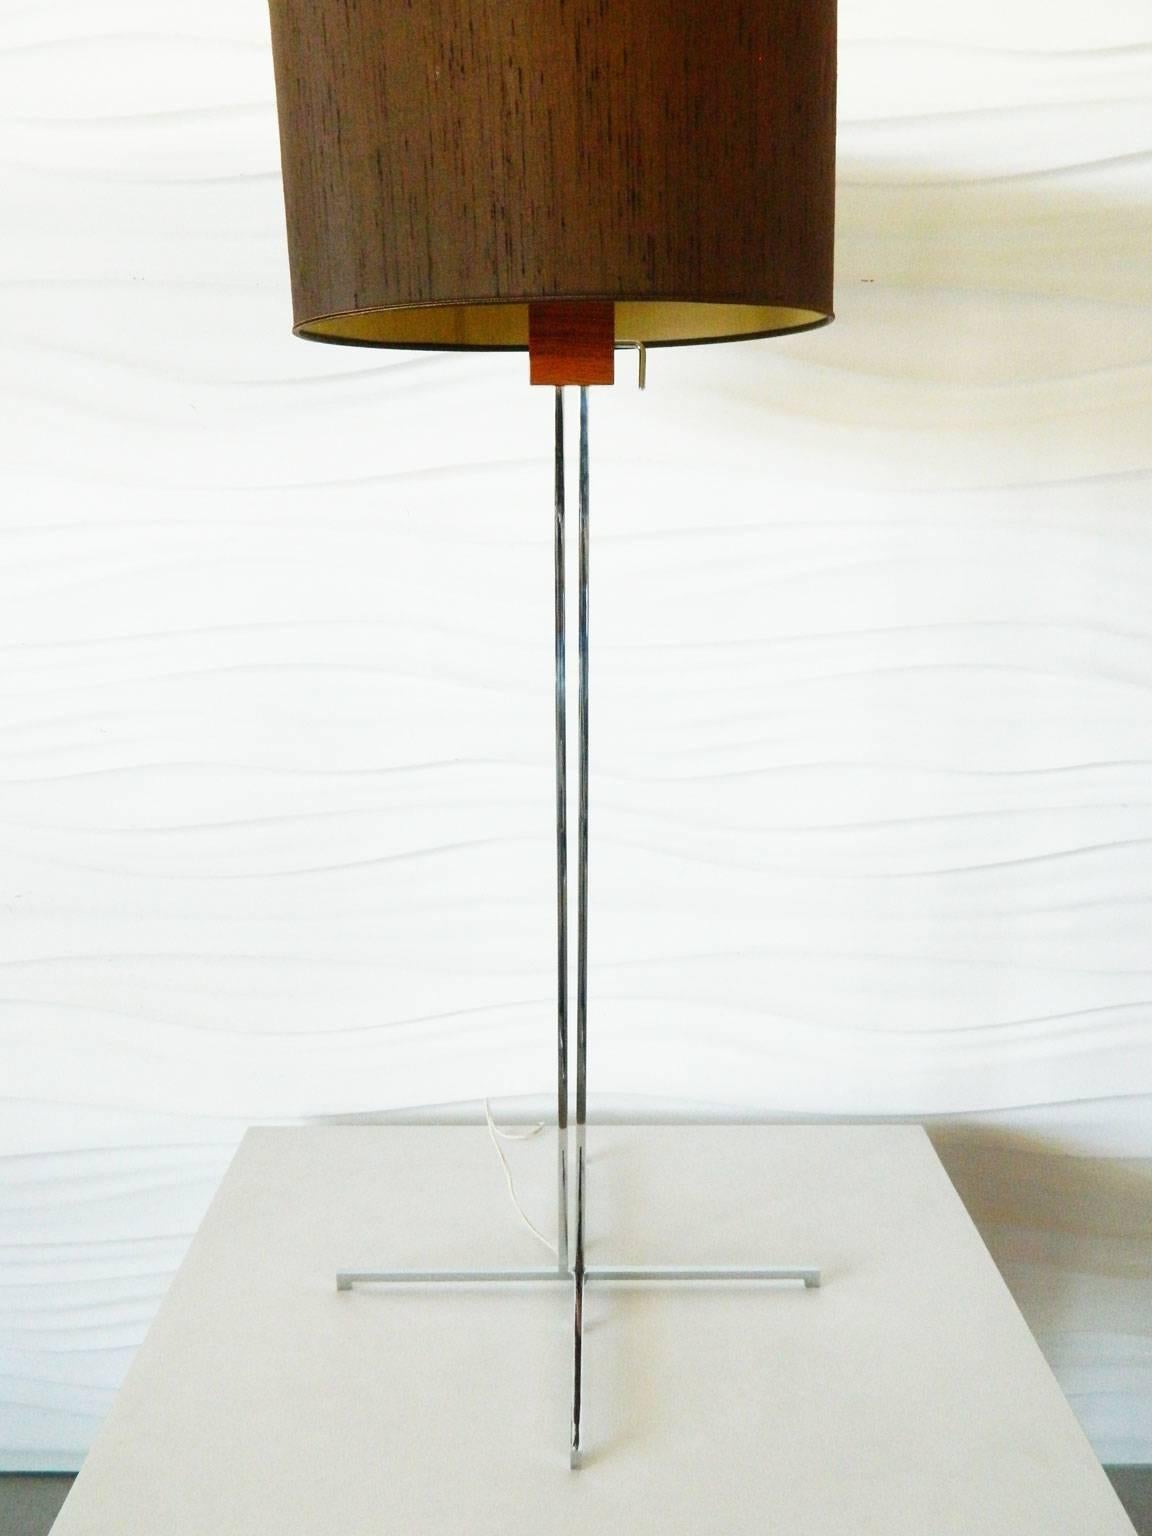 This Swiss made adjustable chrome and walnut floor lamp is by Hans Eichenberger. It can vary in height from 42 inches to 78 inches and has three light bulb sockets.